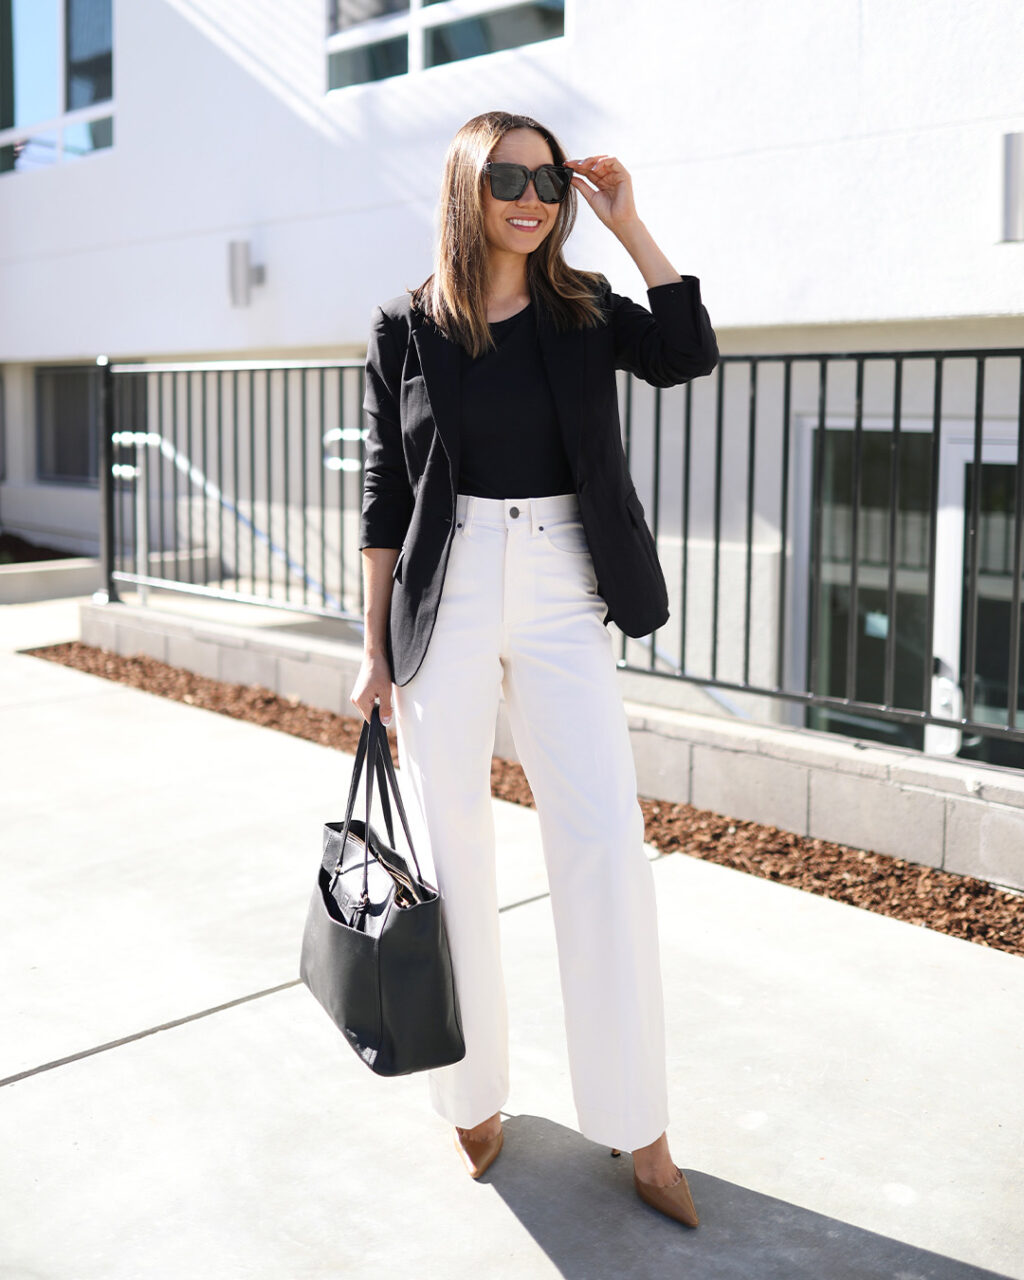 Business Trip Outfits That Fit in a Carry-on, Styled by Jasmine Ricks